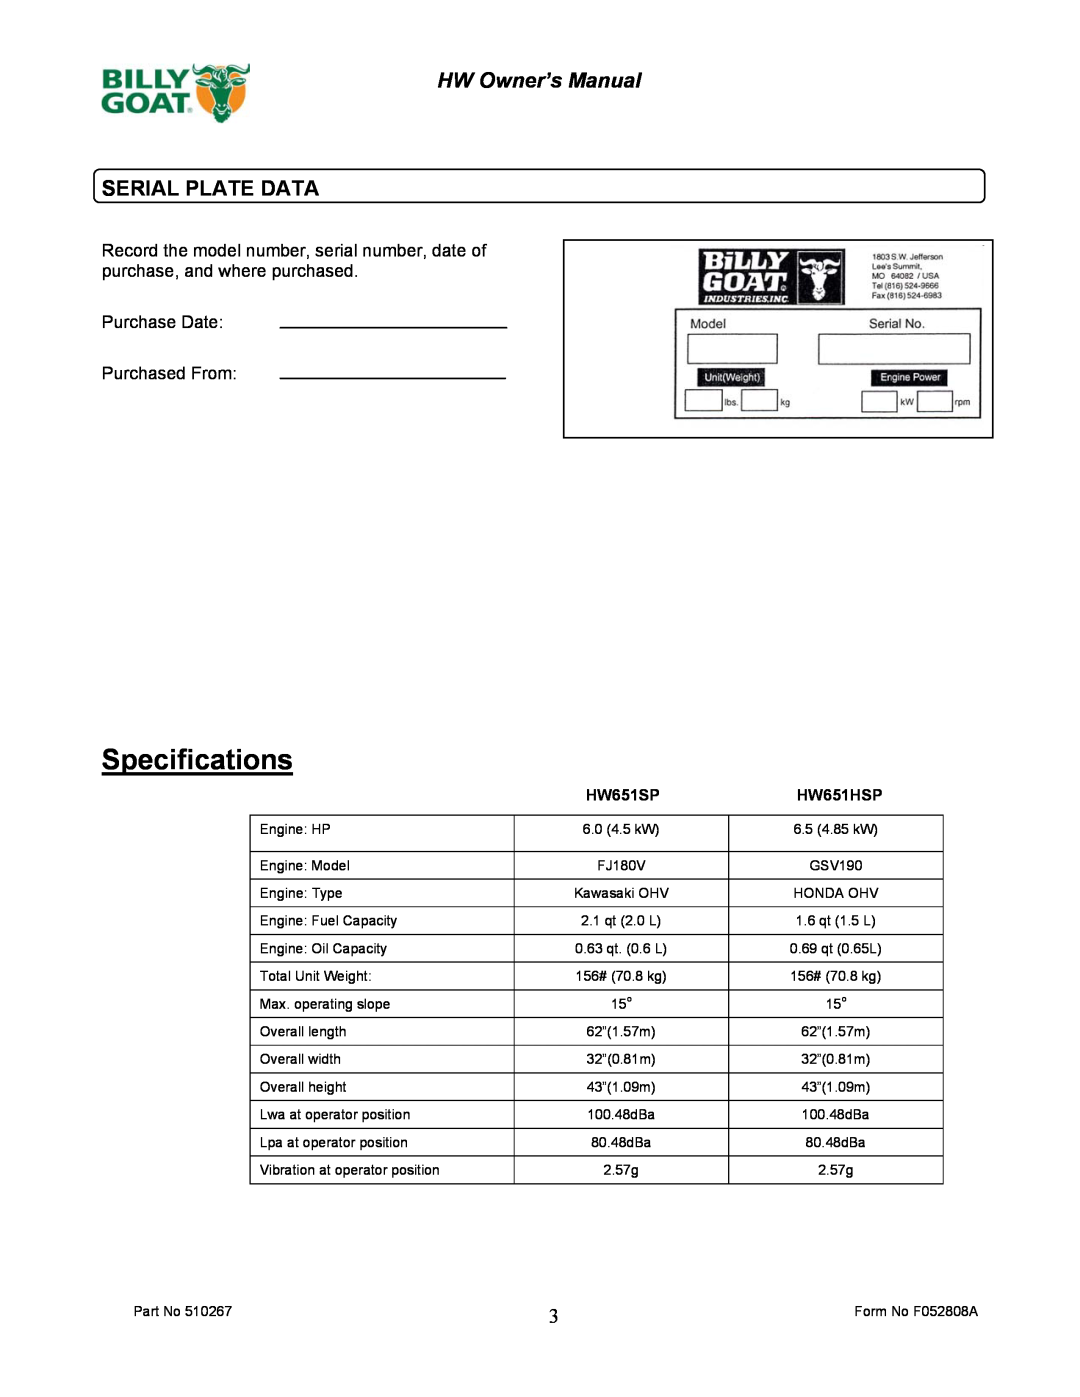 Billy Goat HW651HSP owner manual Serial Plate Data, Specifications, HW651SP 